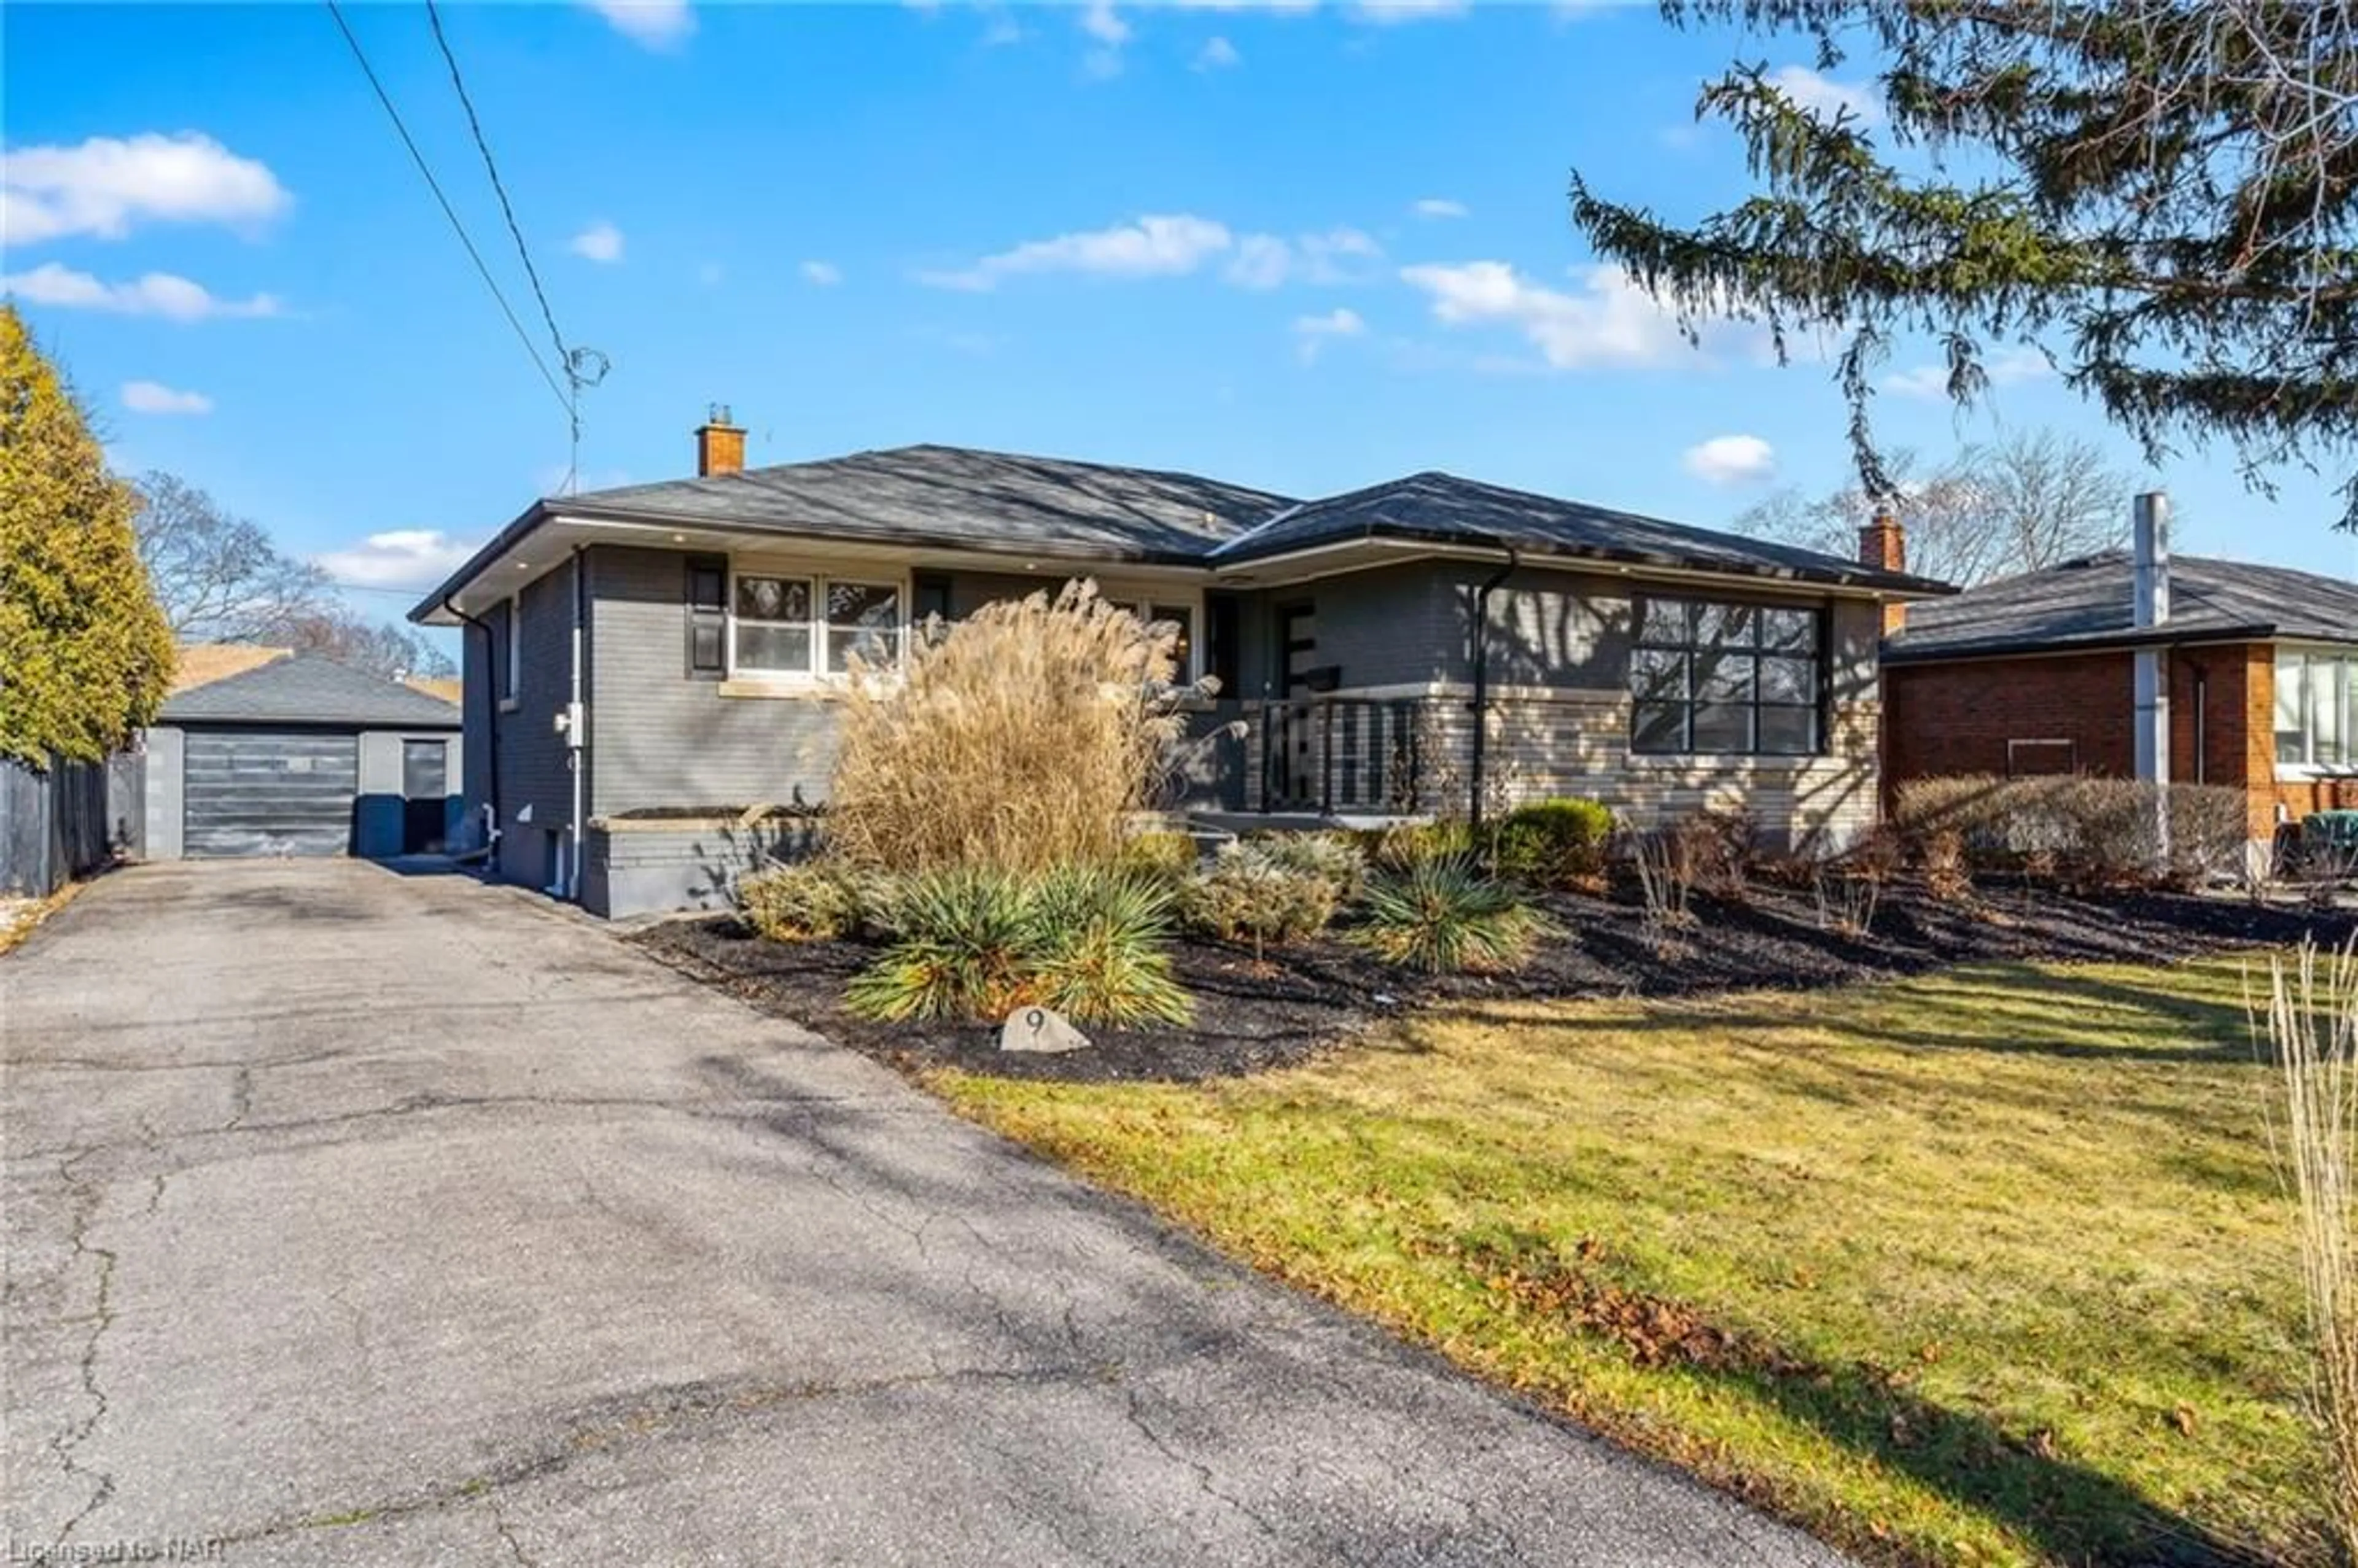 Frontside or backside of a home for 9 Regina Ave, St. Catharines Ontario L2M 3G5